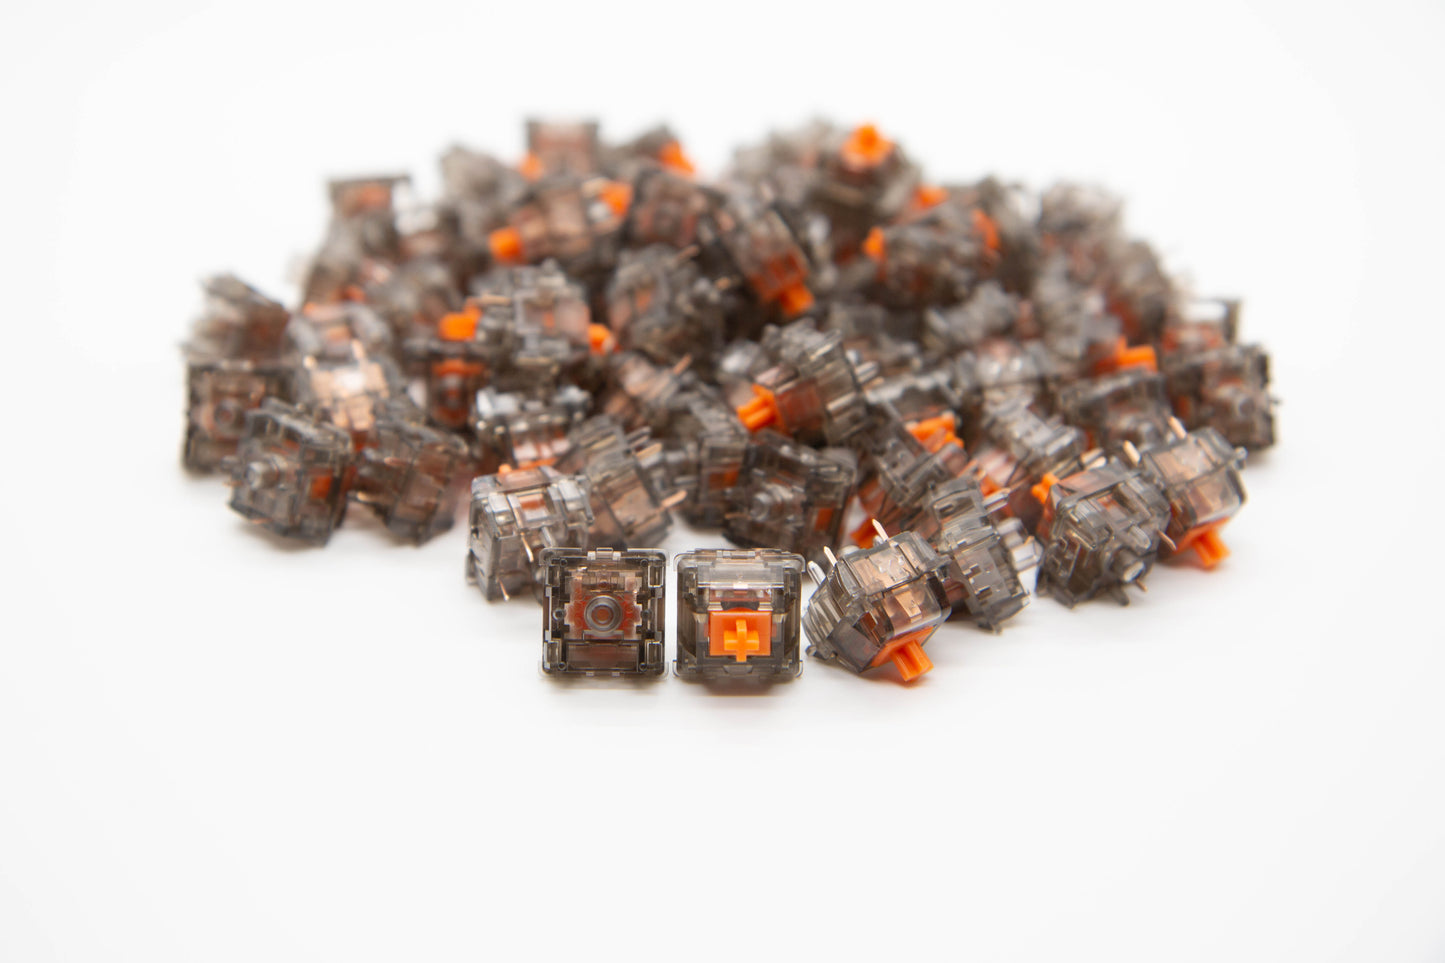 Close-up shot of a pile of Dusk Panda-Tactile mechanical keyboard switches featuring gray transparent housing and orange stems